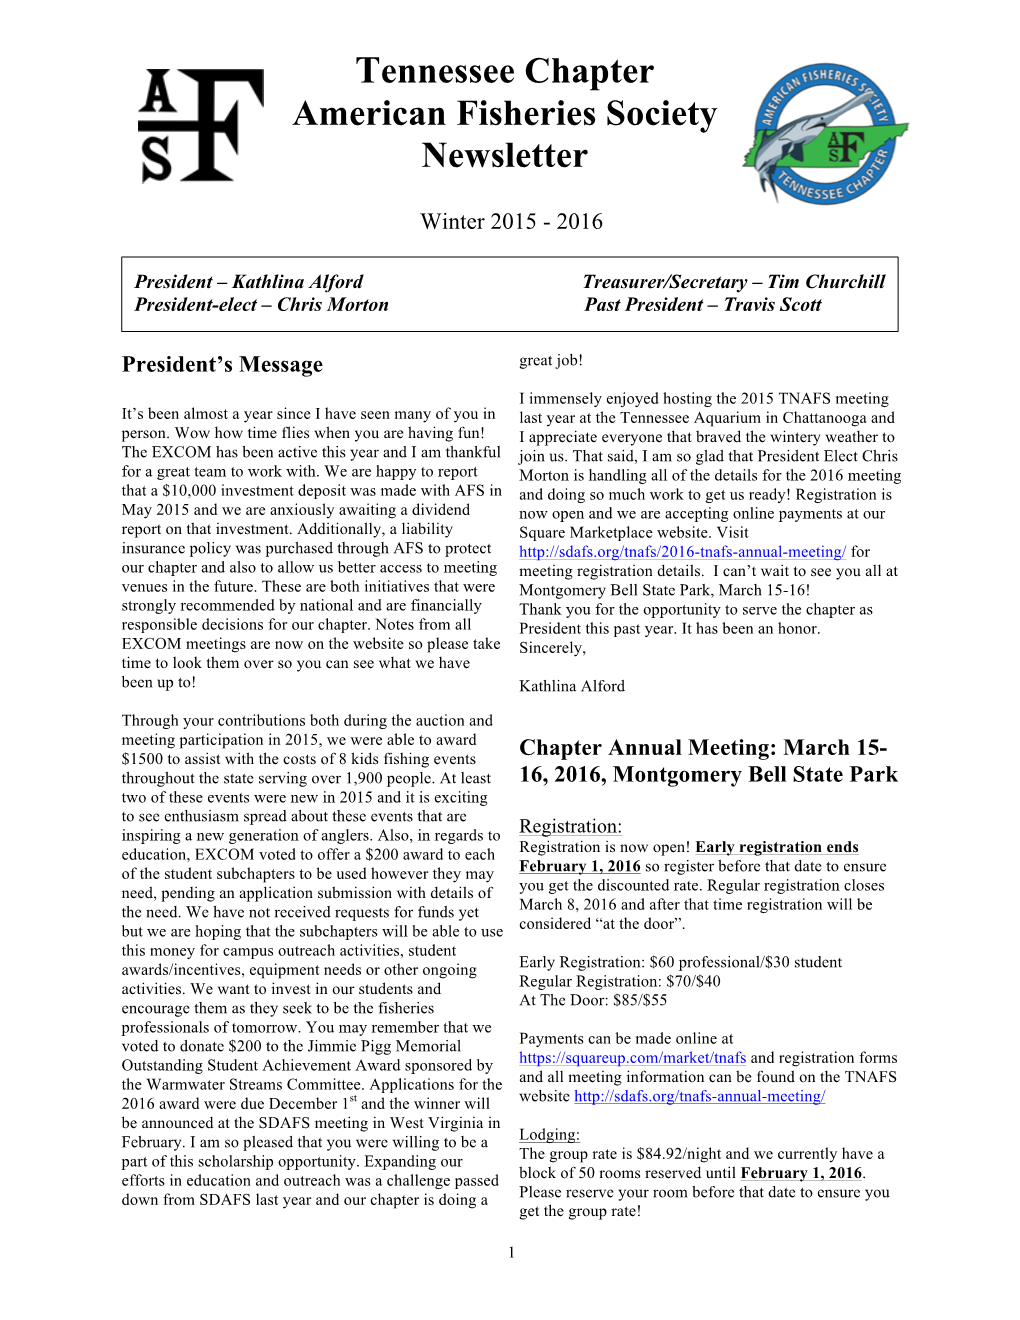 Tennessee Chapter American Fisheries Society Newsletter